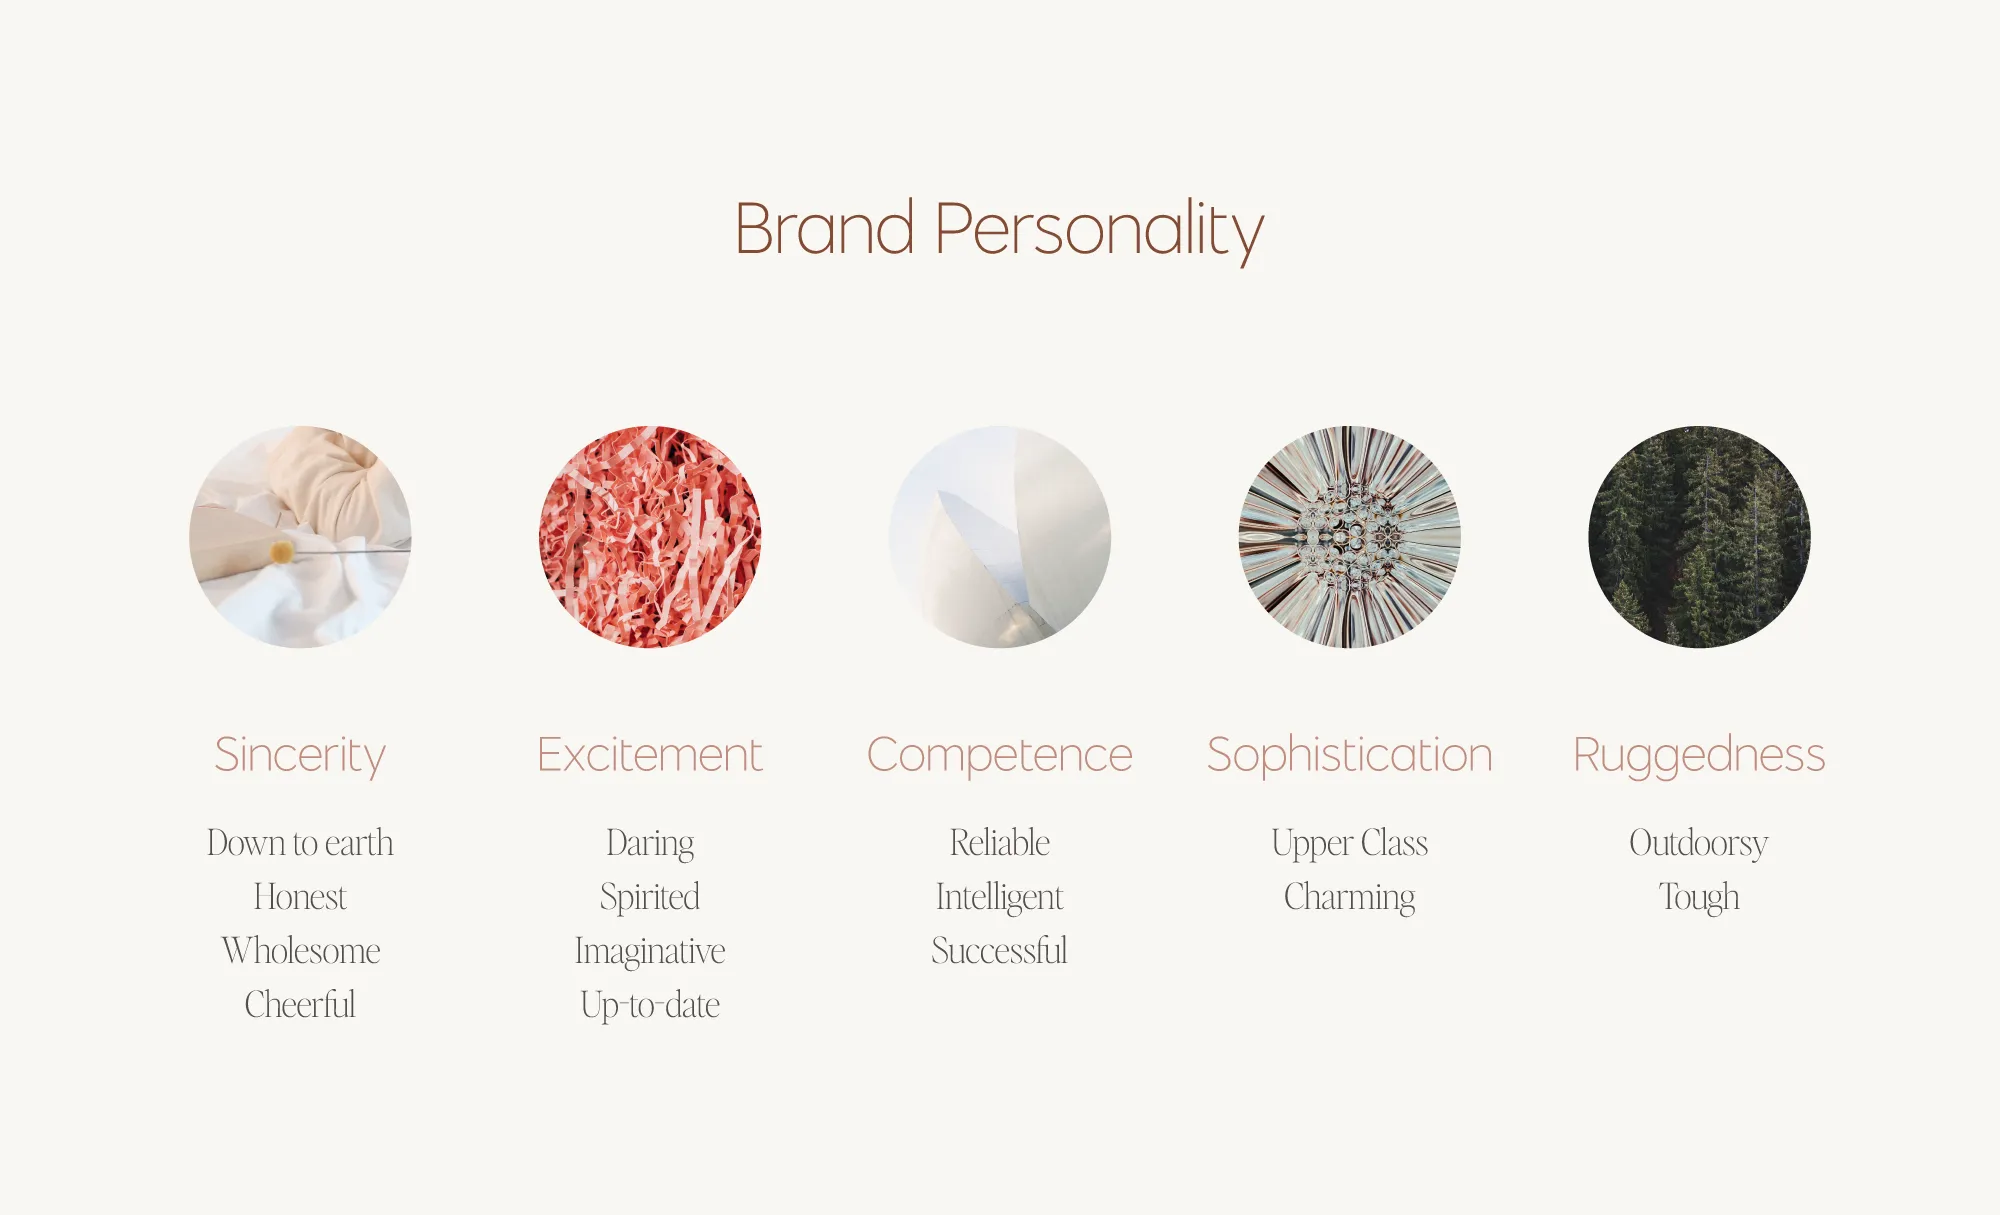 Brand personality: The Aaker's 5 dimensions model